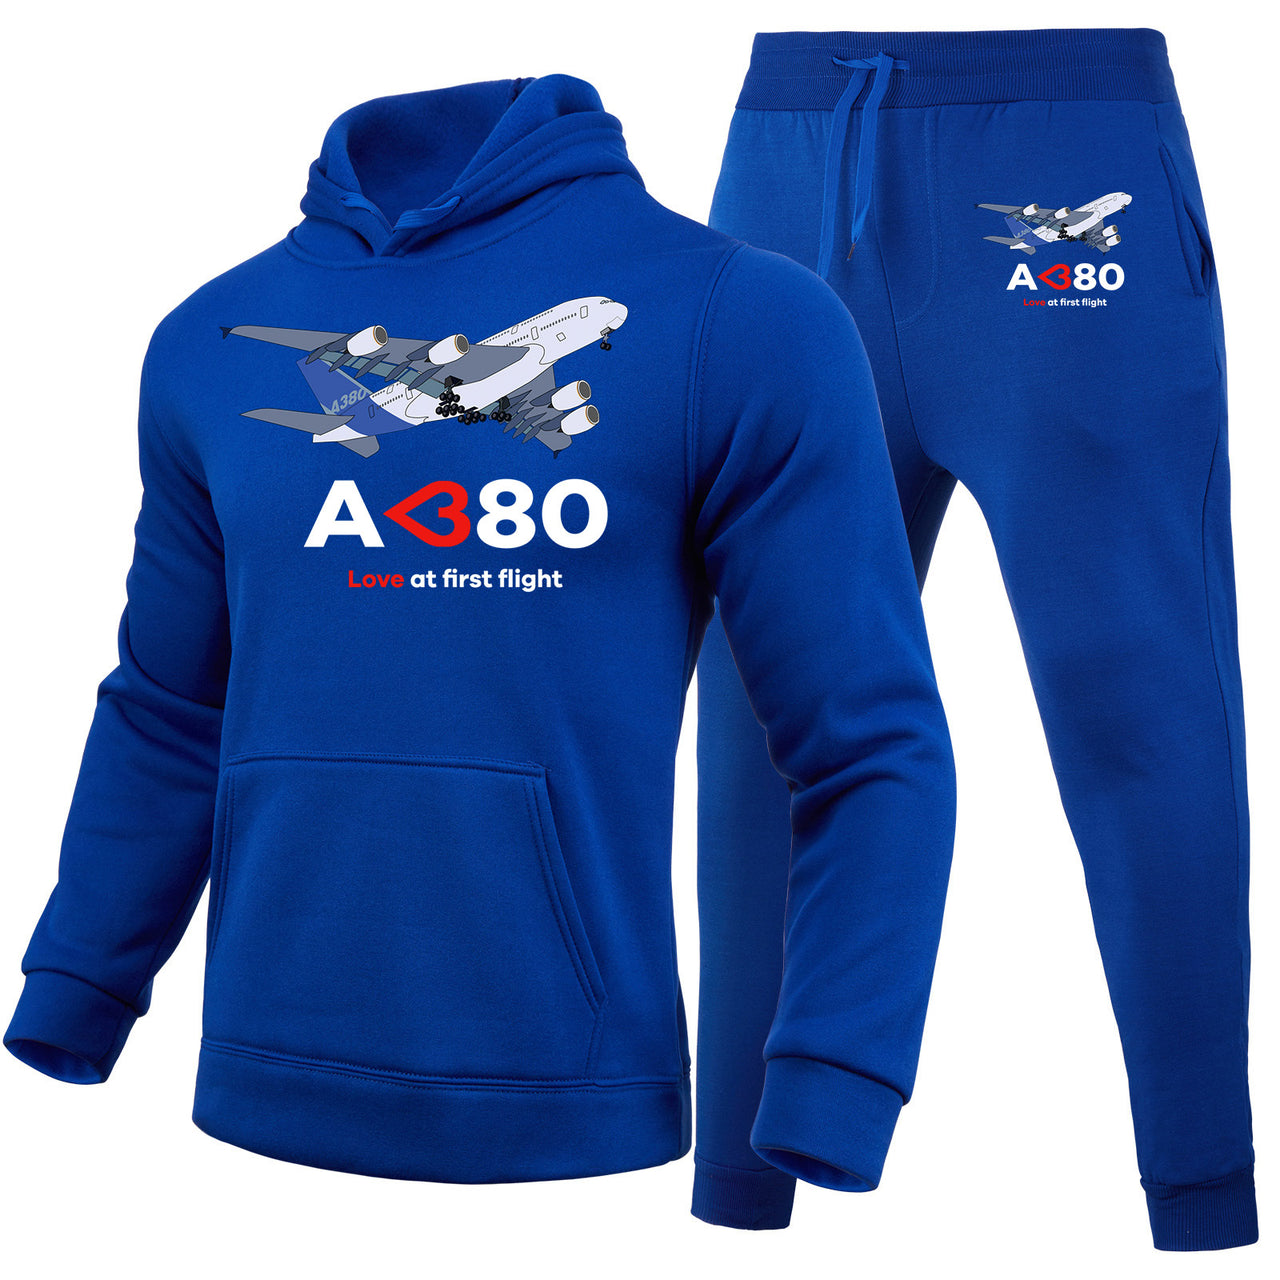 Airbus A380 Love at first flight Designed Hoodies & Sweatpants Set